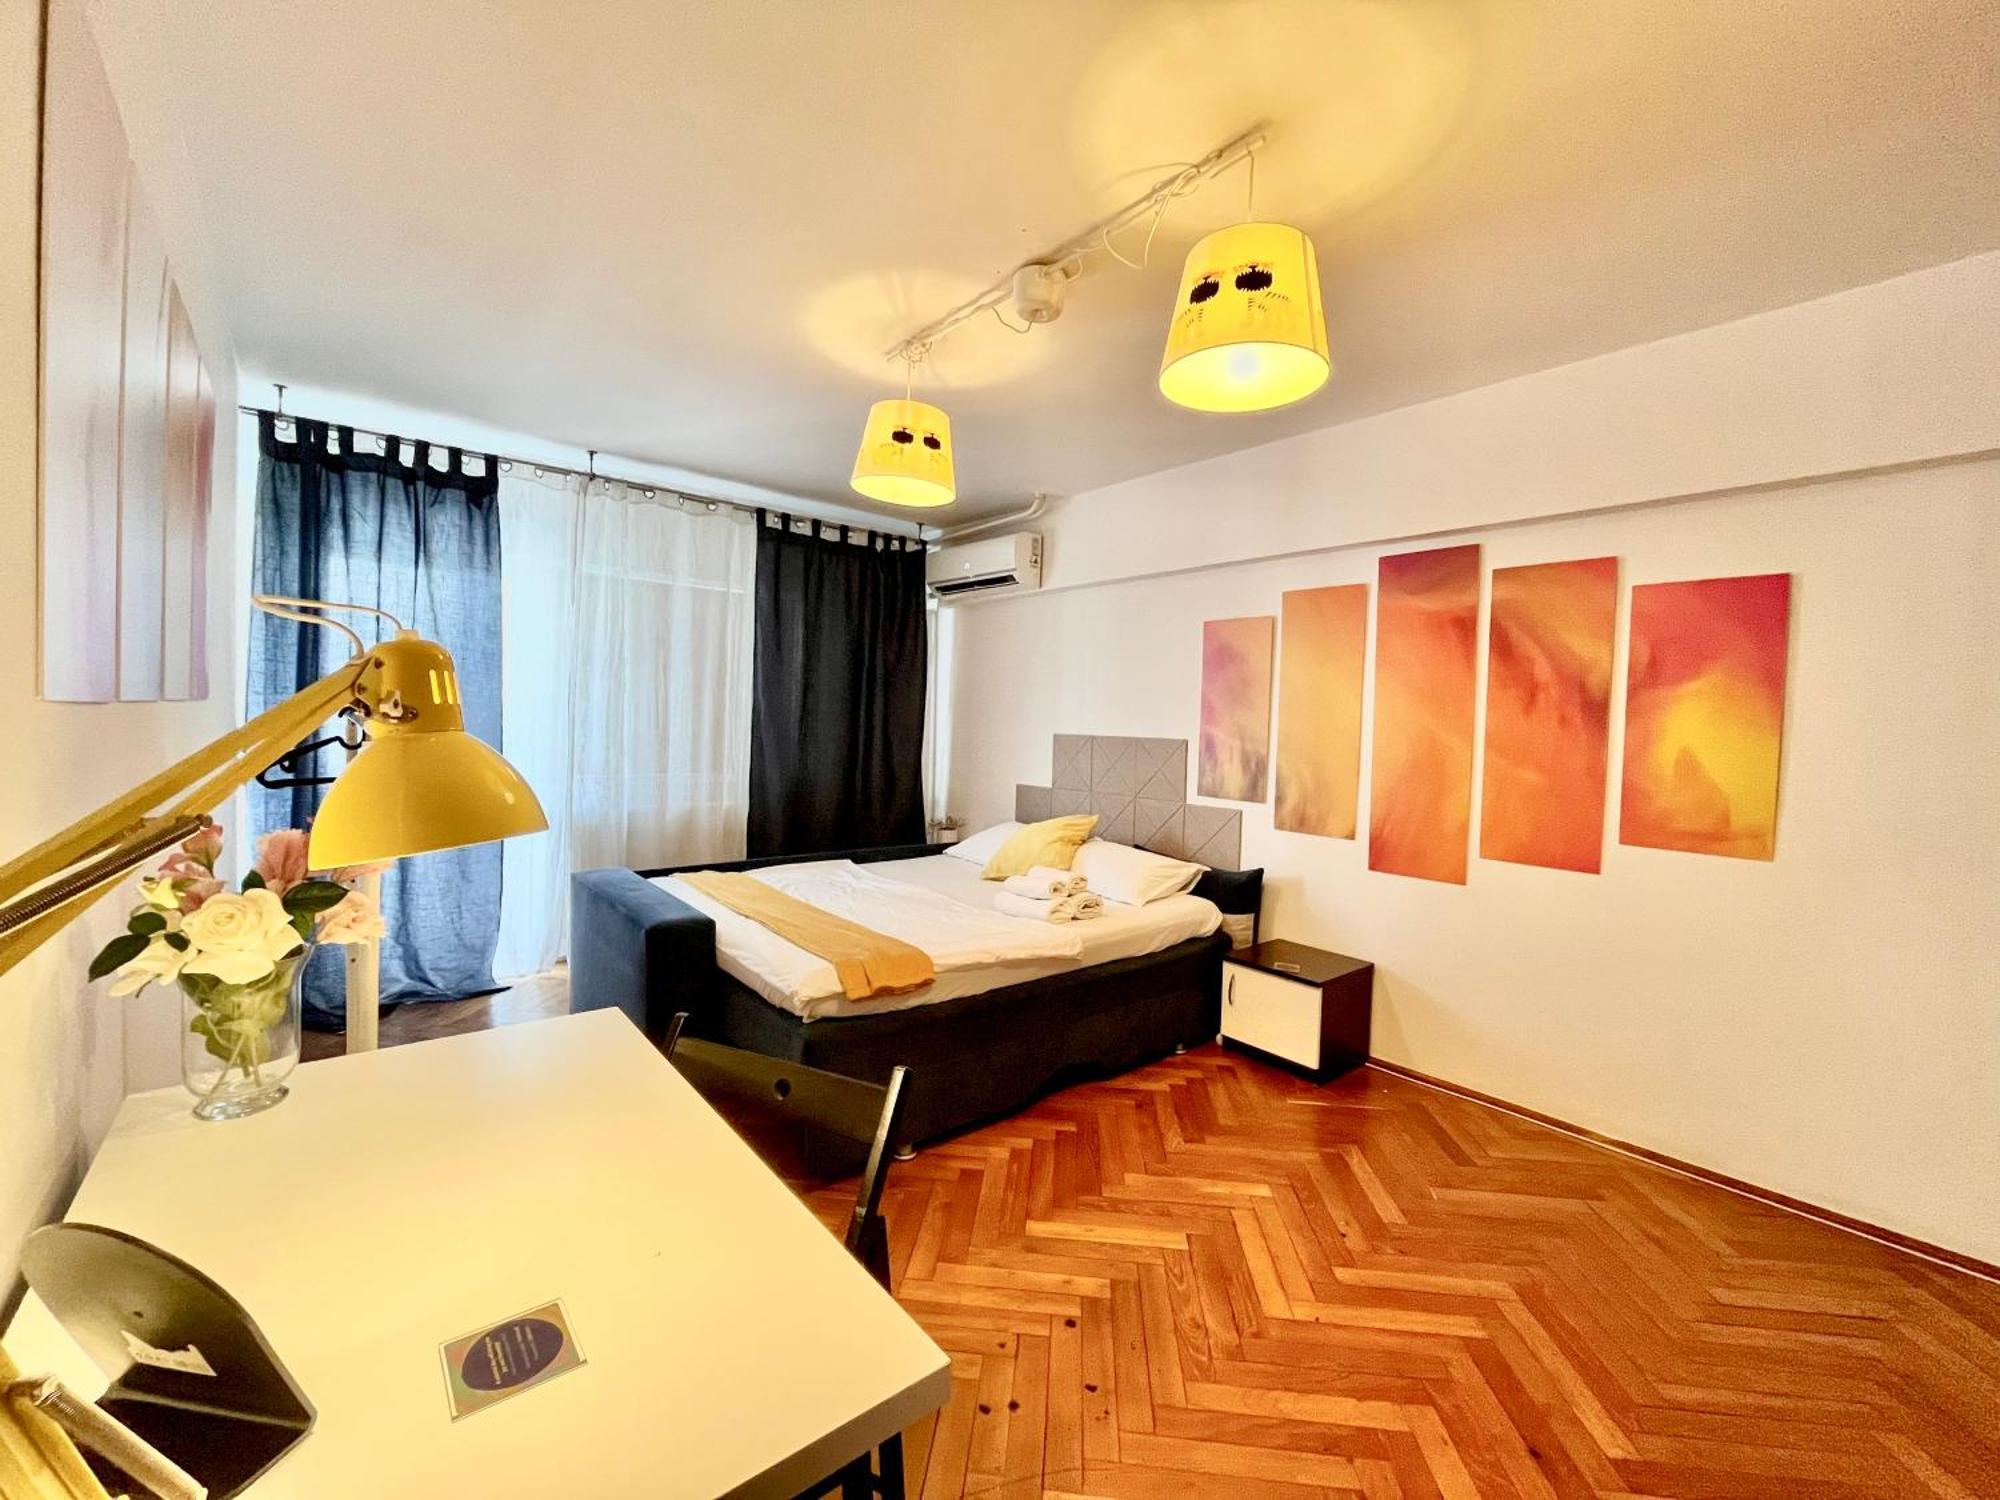 City Center Unirii Square Private Rooms With City View - Shared Amenities 布加勒斯特 客房 照片